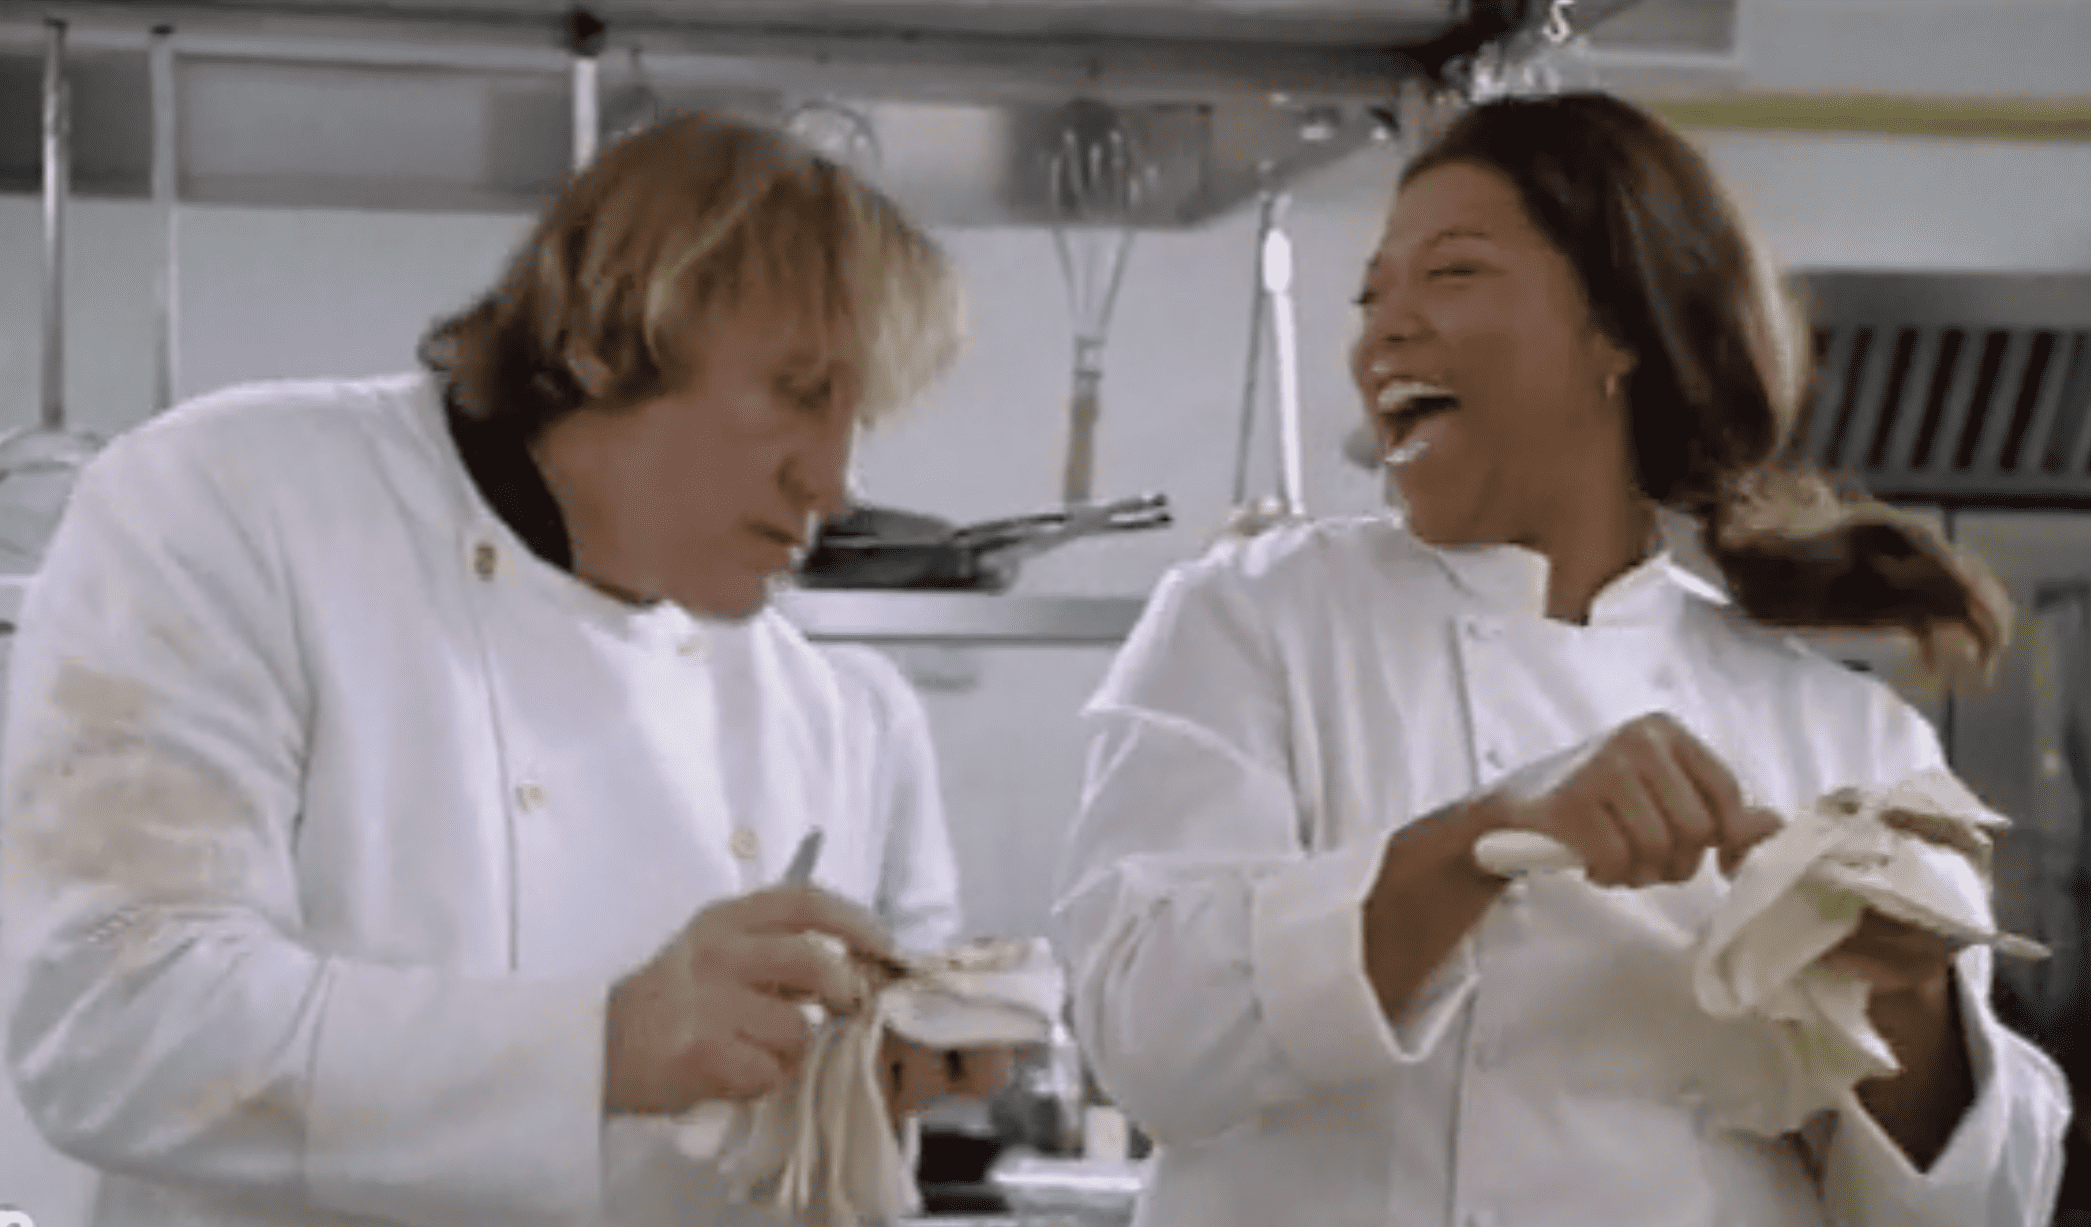 Two chefs chat and laugh in a kitchen in this image from Paramount Plus